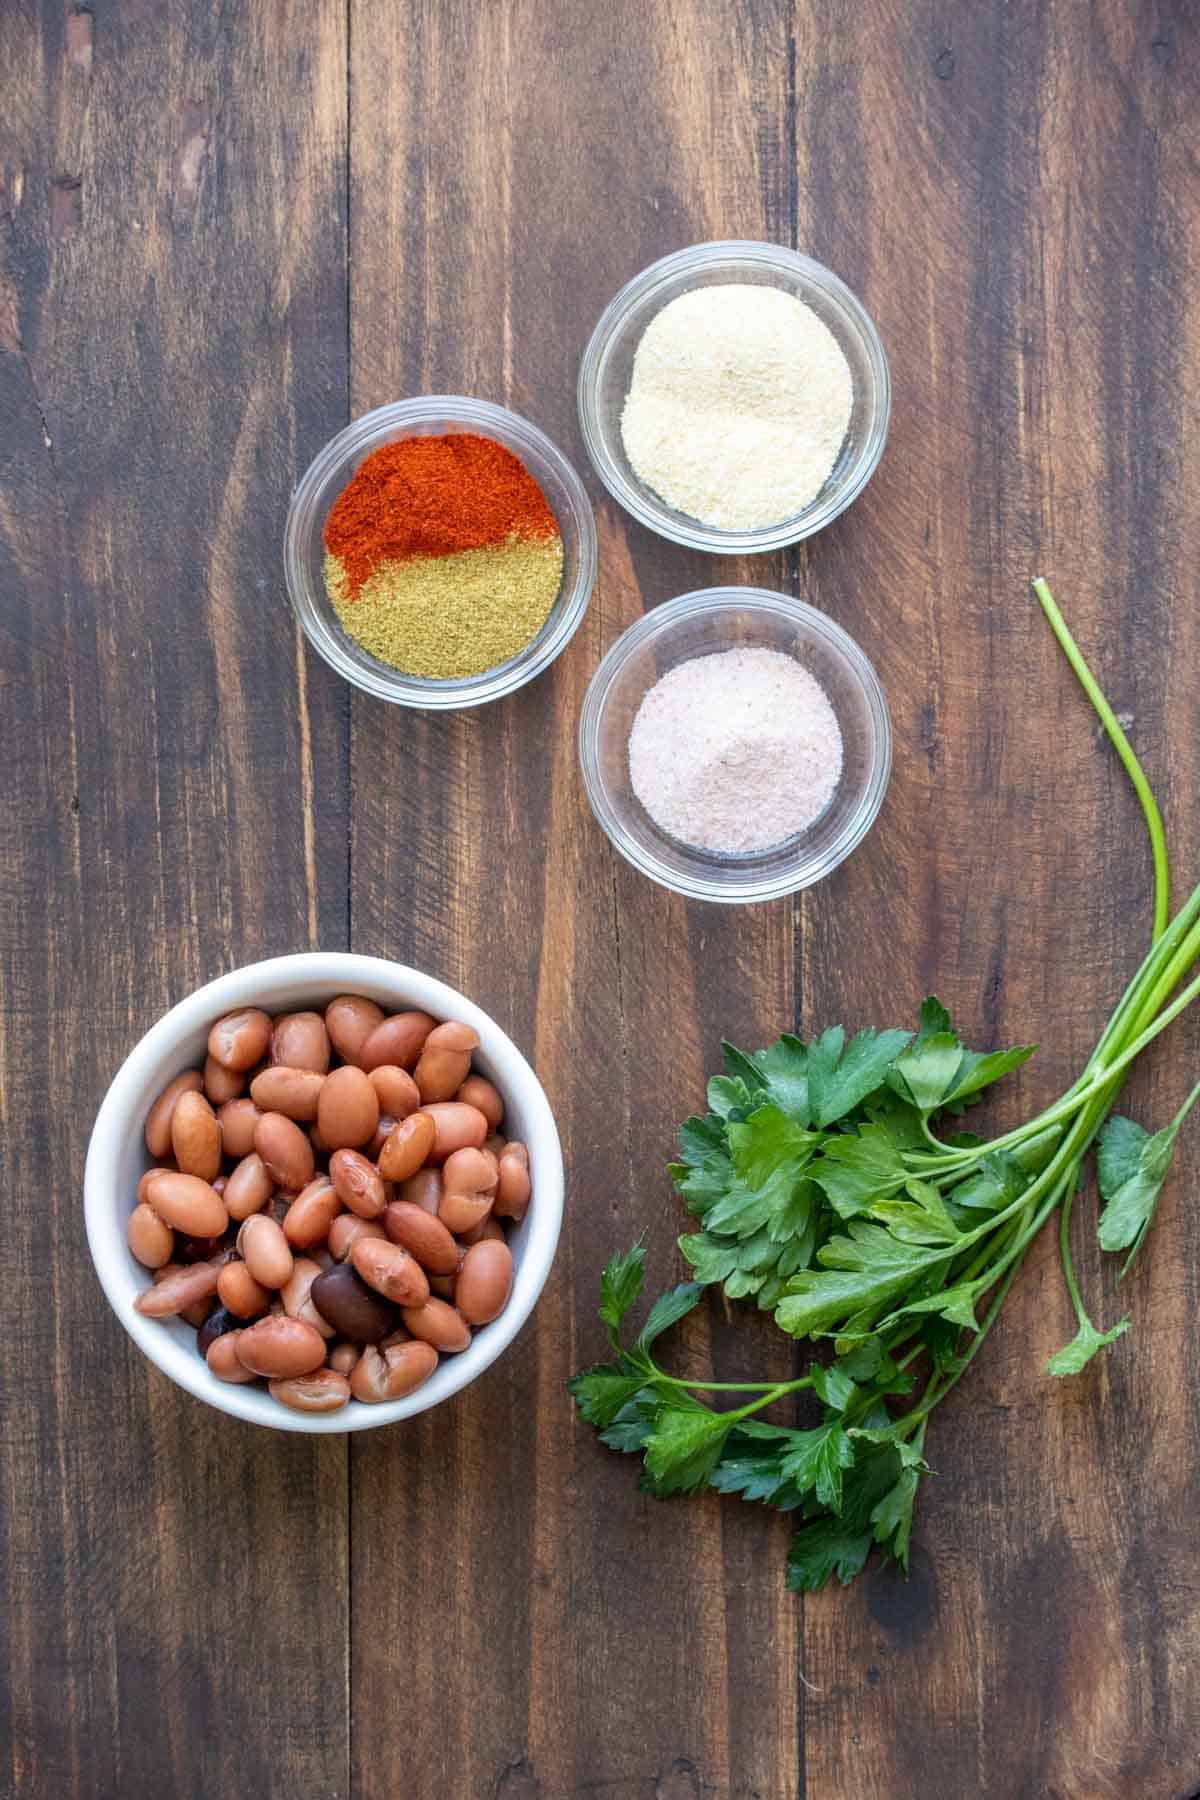 Bowls of beans, spices and fresh cilantro on a wooden surface